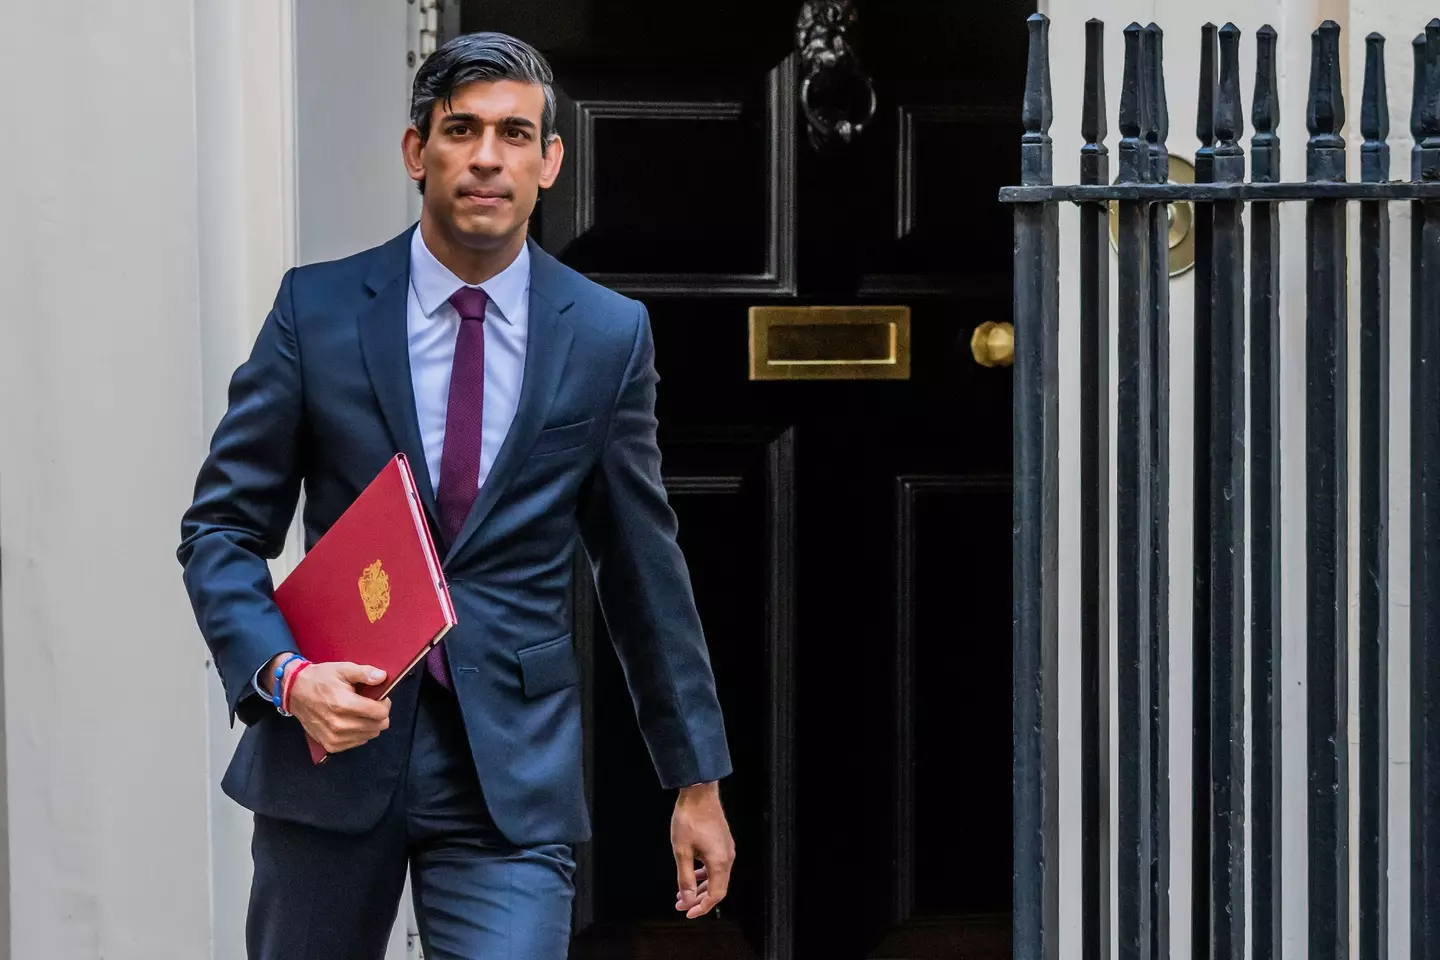 Prime Minster Rishi Sunak has commented on the BBC Match of the Day boycott.